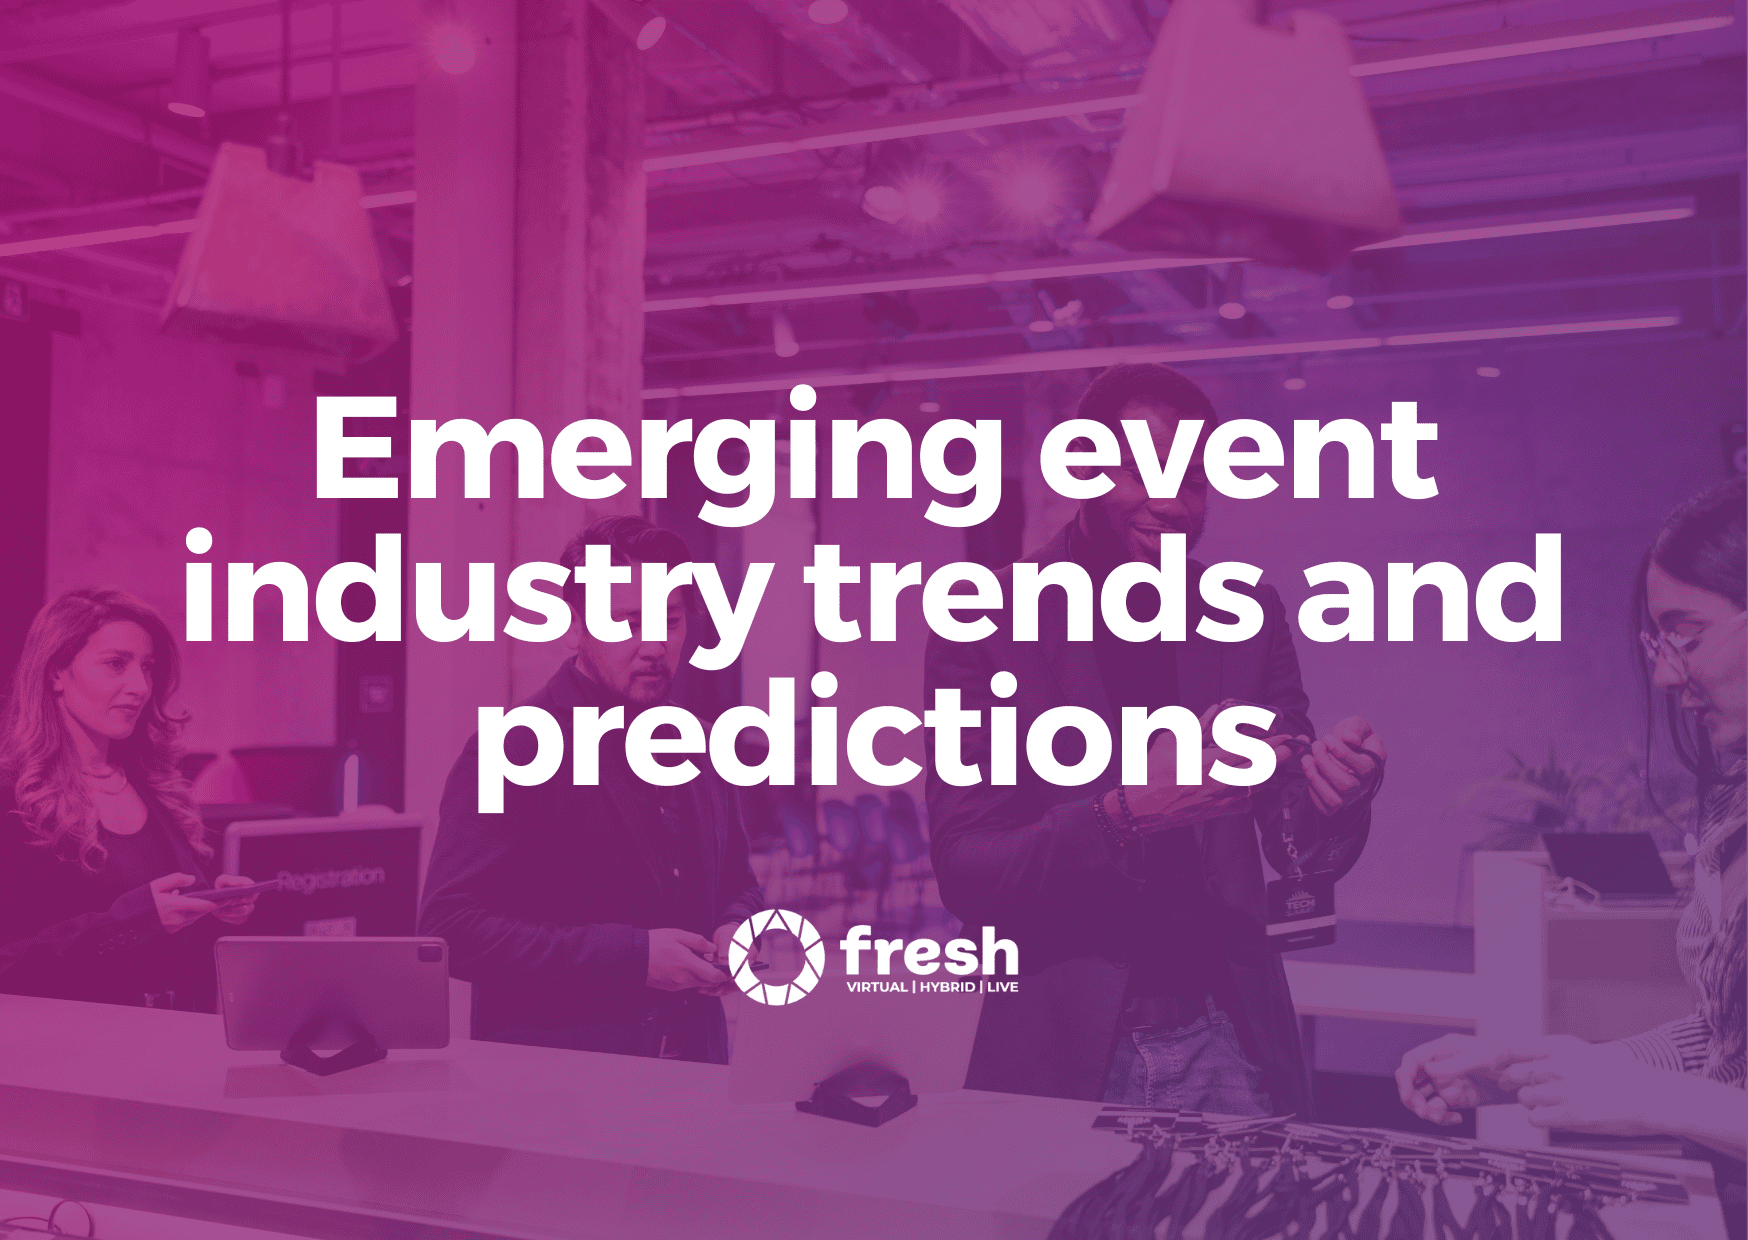 Event industry trends